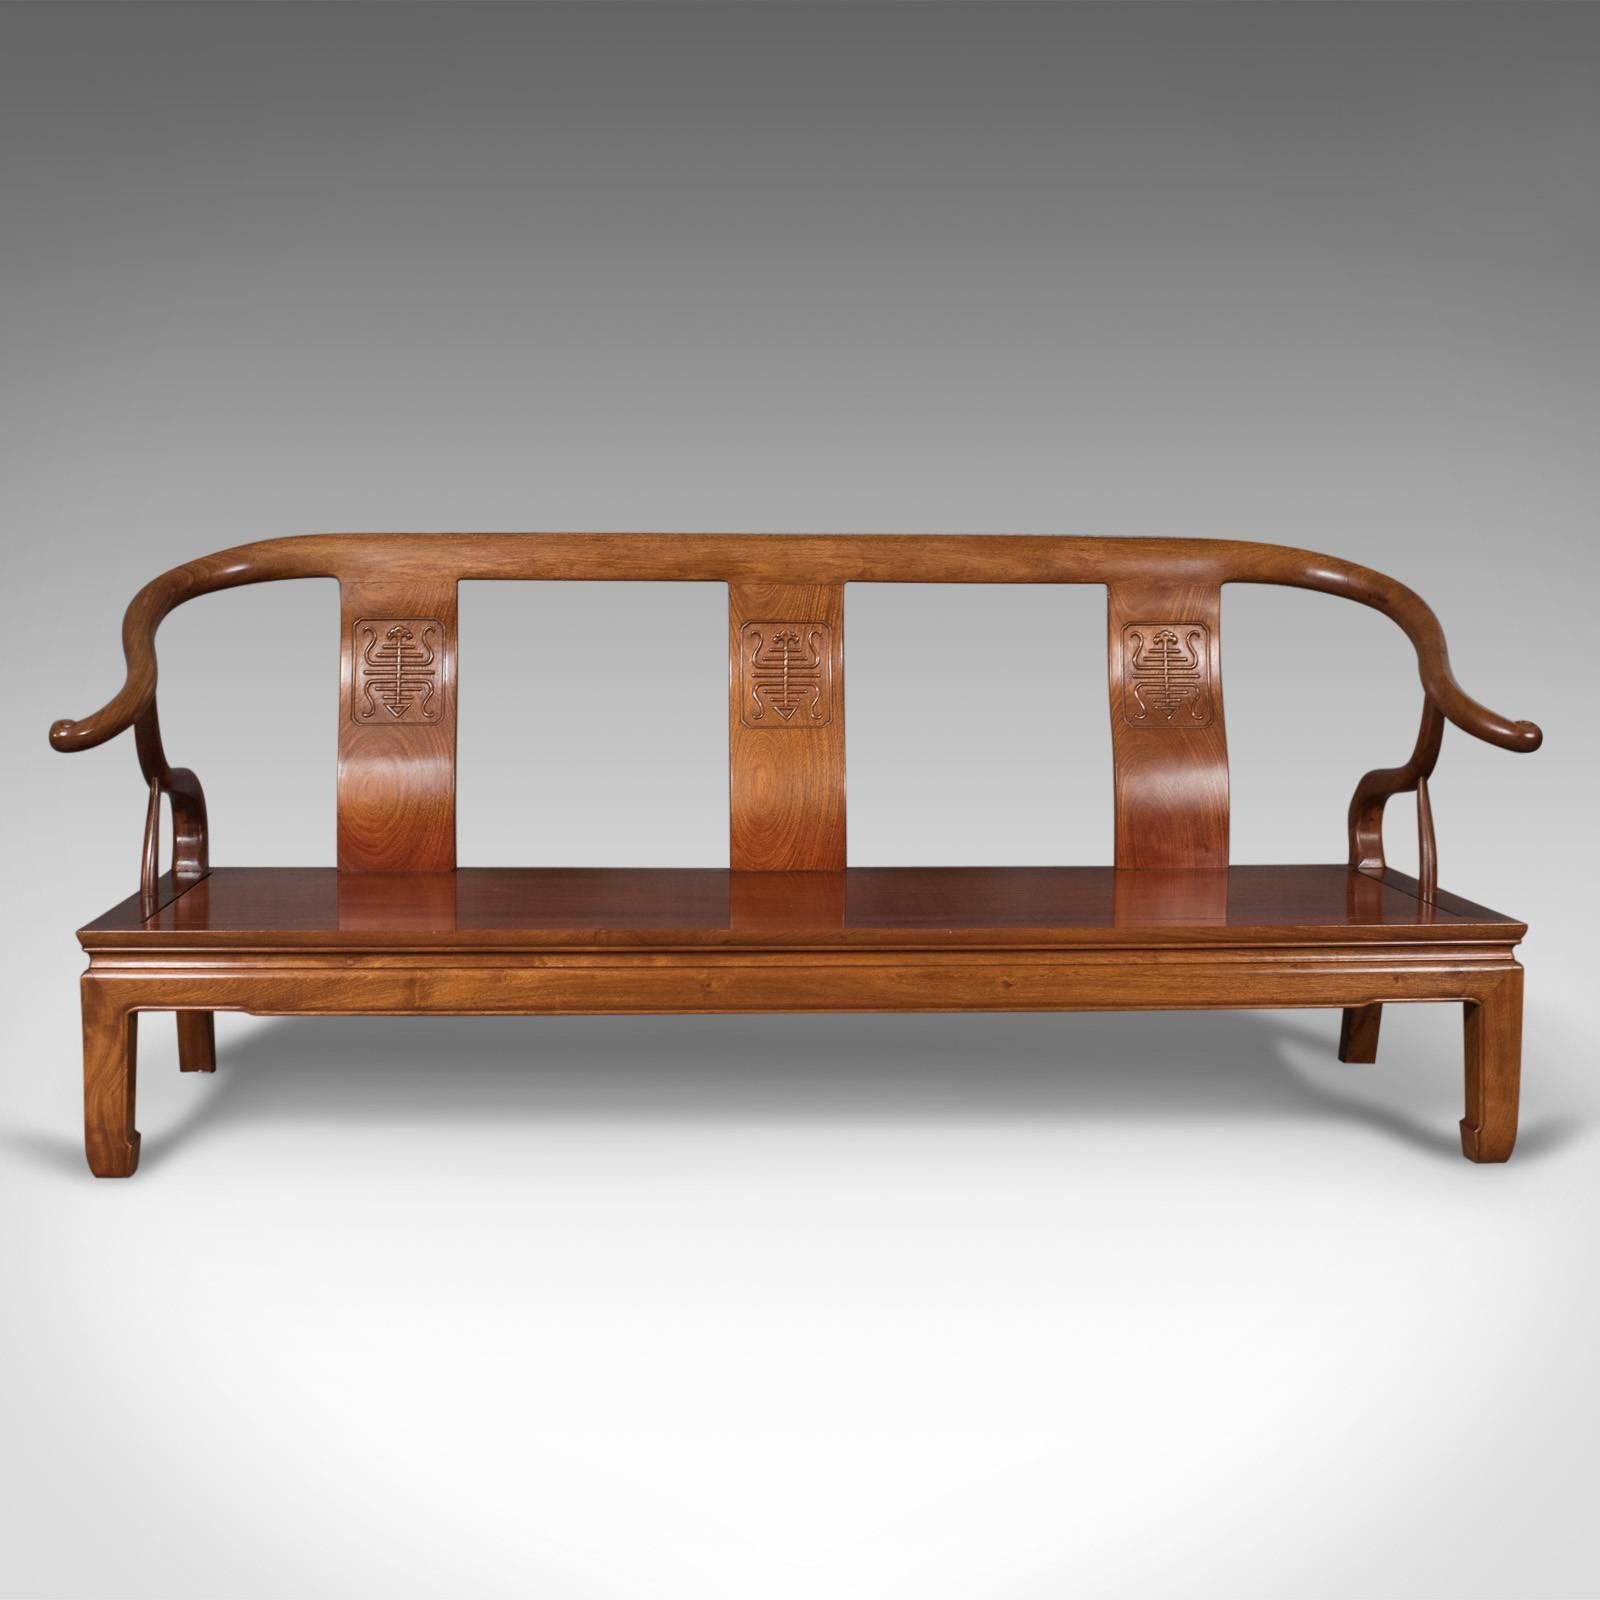 This is a Chinese rosewood three-seat bench in traditional form, dating to the late 20th century.

In super condition with good consistent color
Shaped crest rail runs sinuously into 'cow horn' arms
Oblique scrolled terminals to the